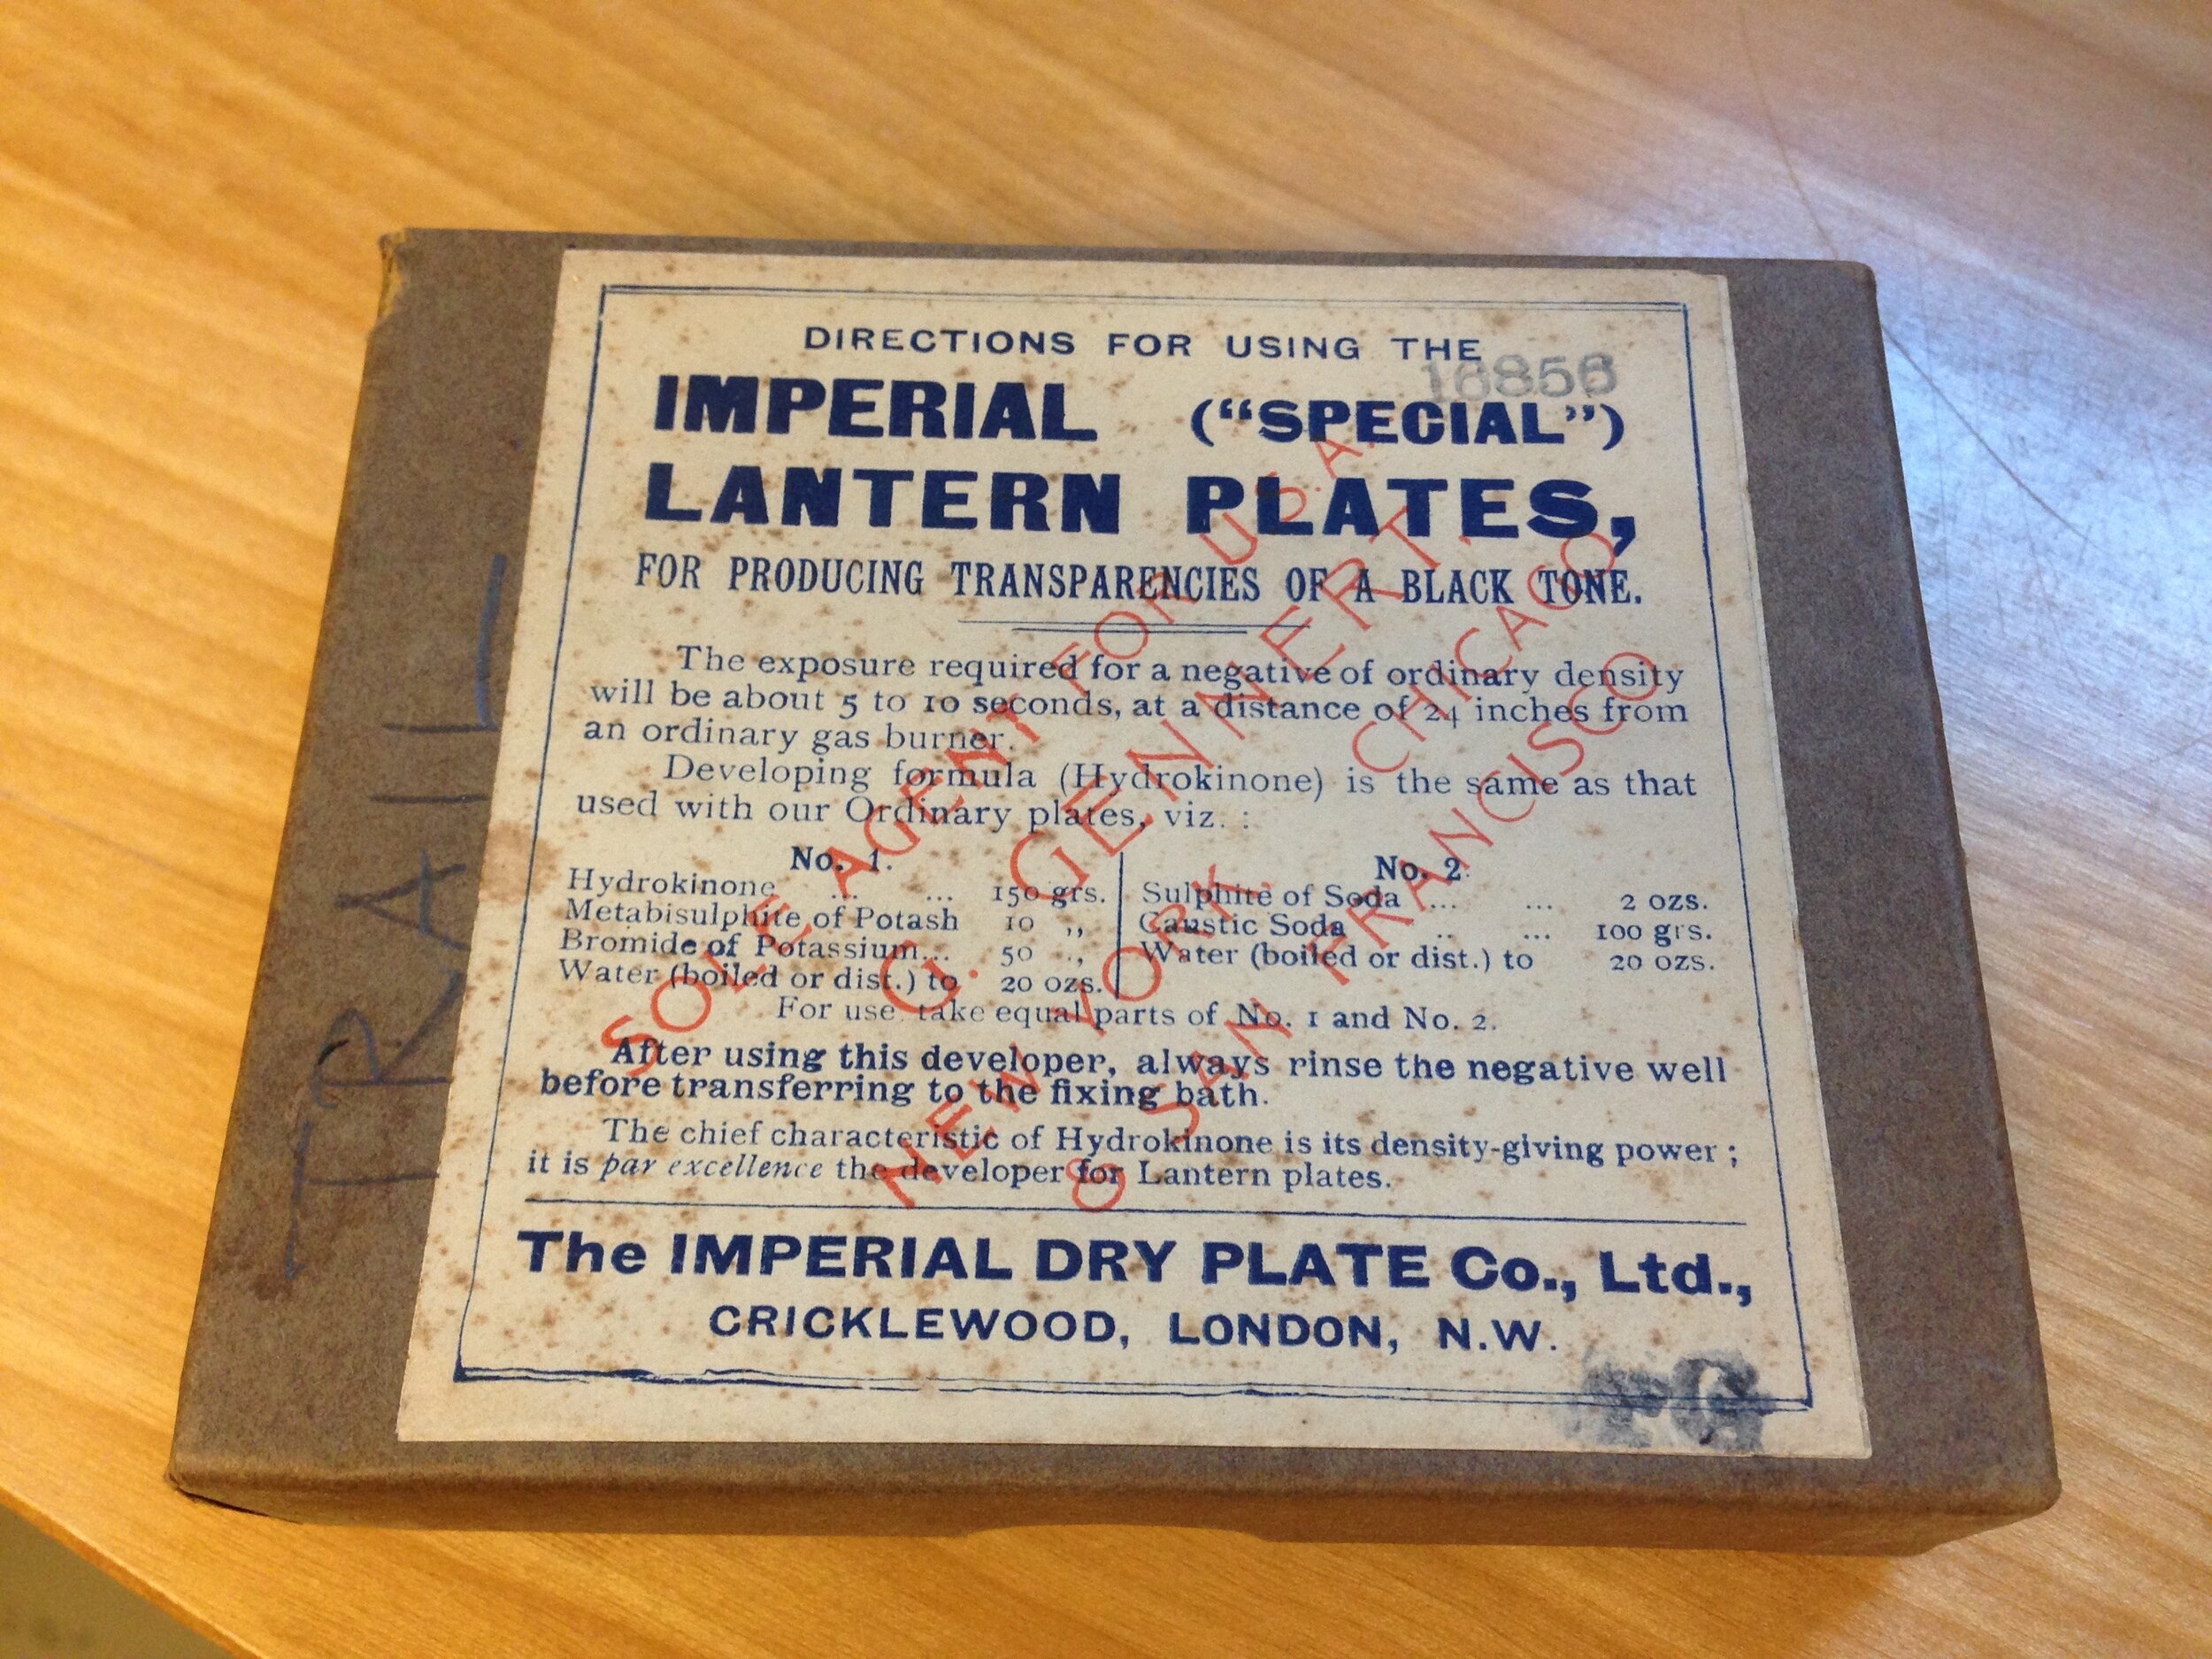   A box of “Imperial (“Special”) Lantern Plates produced by the Imperial Dry Plate Co., Ltd. The box is labeled “TRAIL” and contained glass plate negatives by Herbert Wheaton Congdon. (Green Mountain Club Archives).  